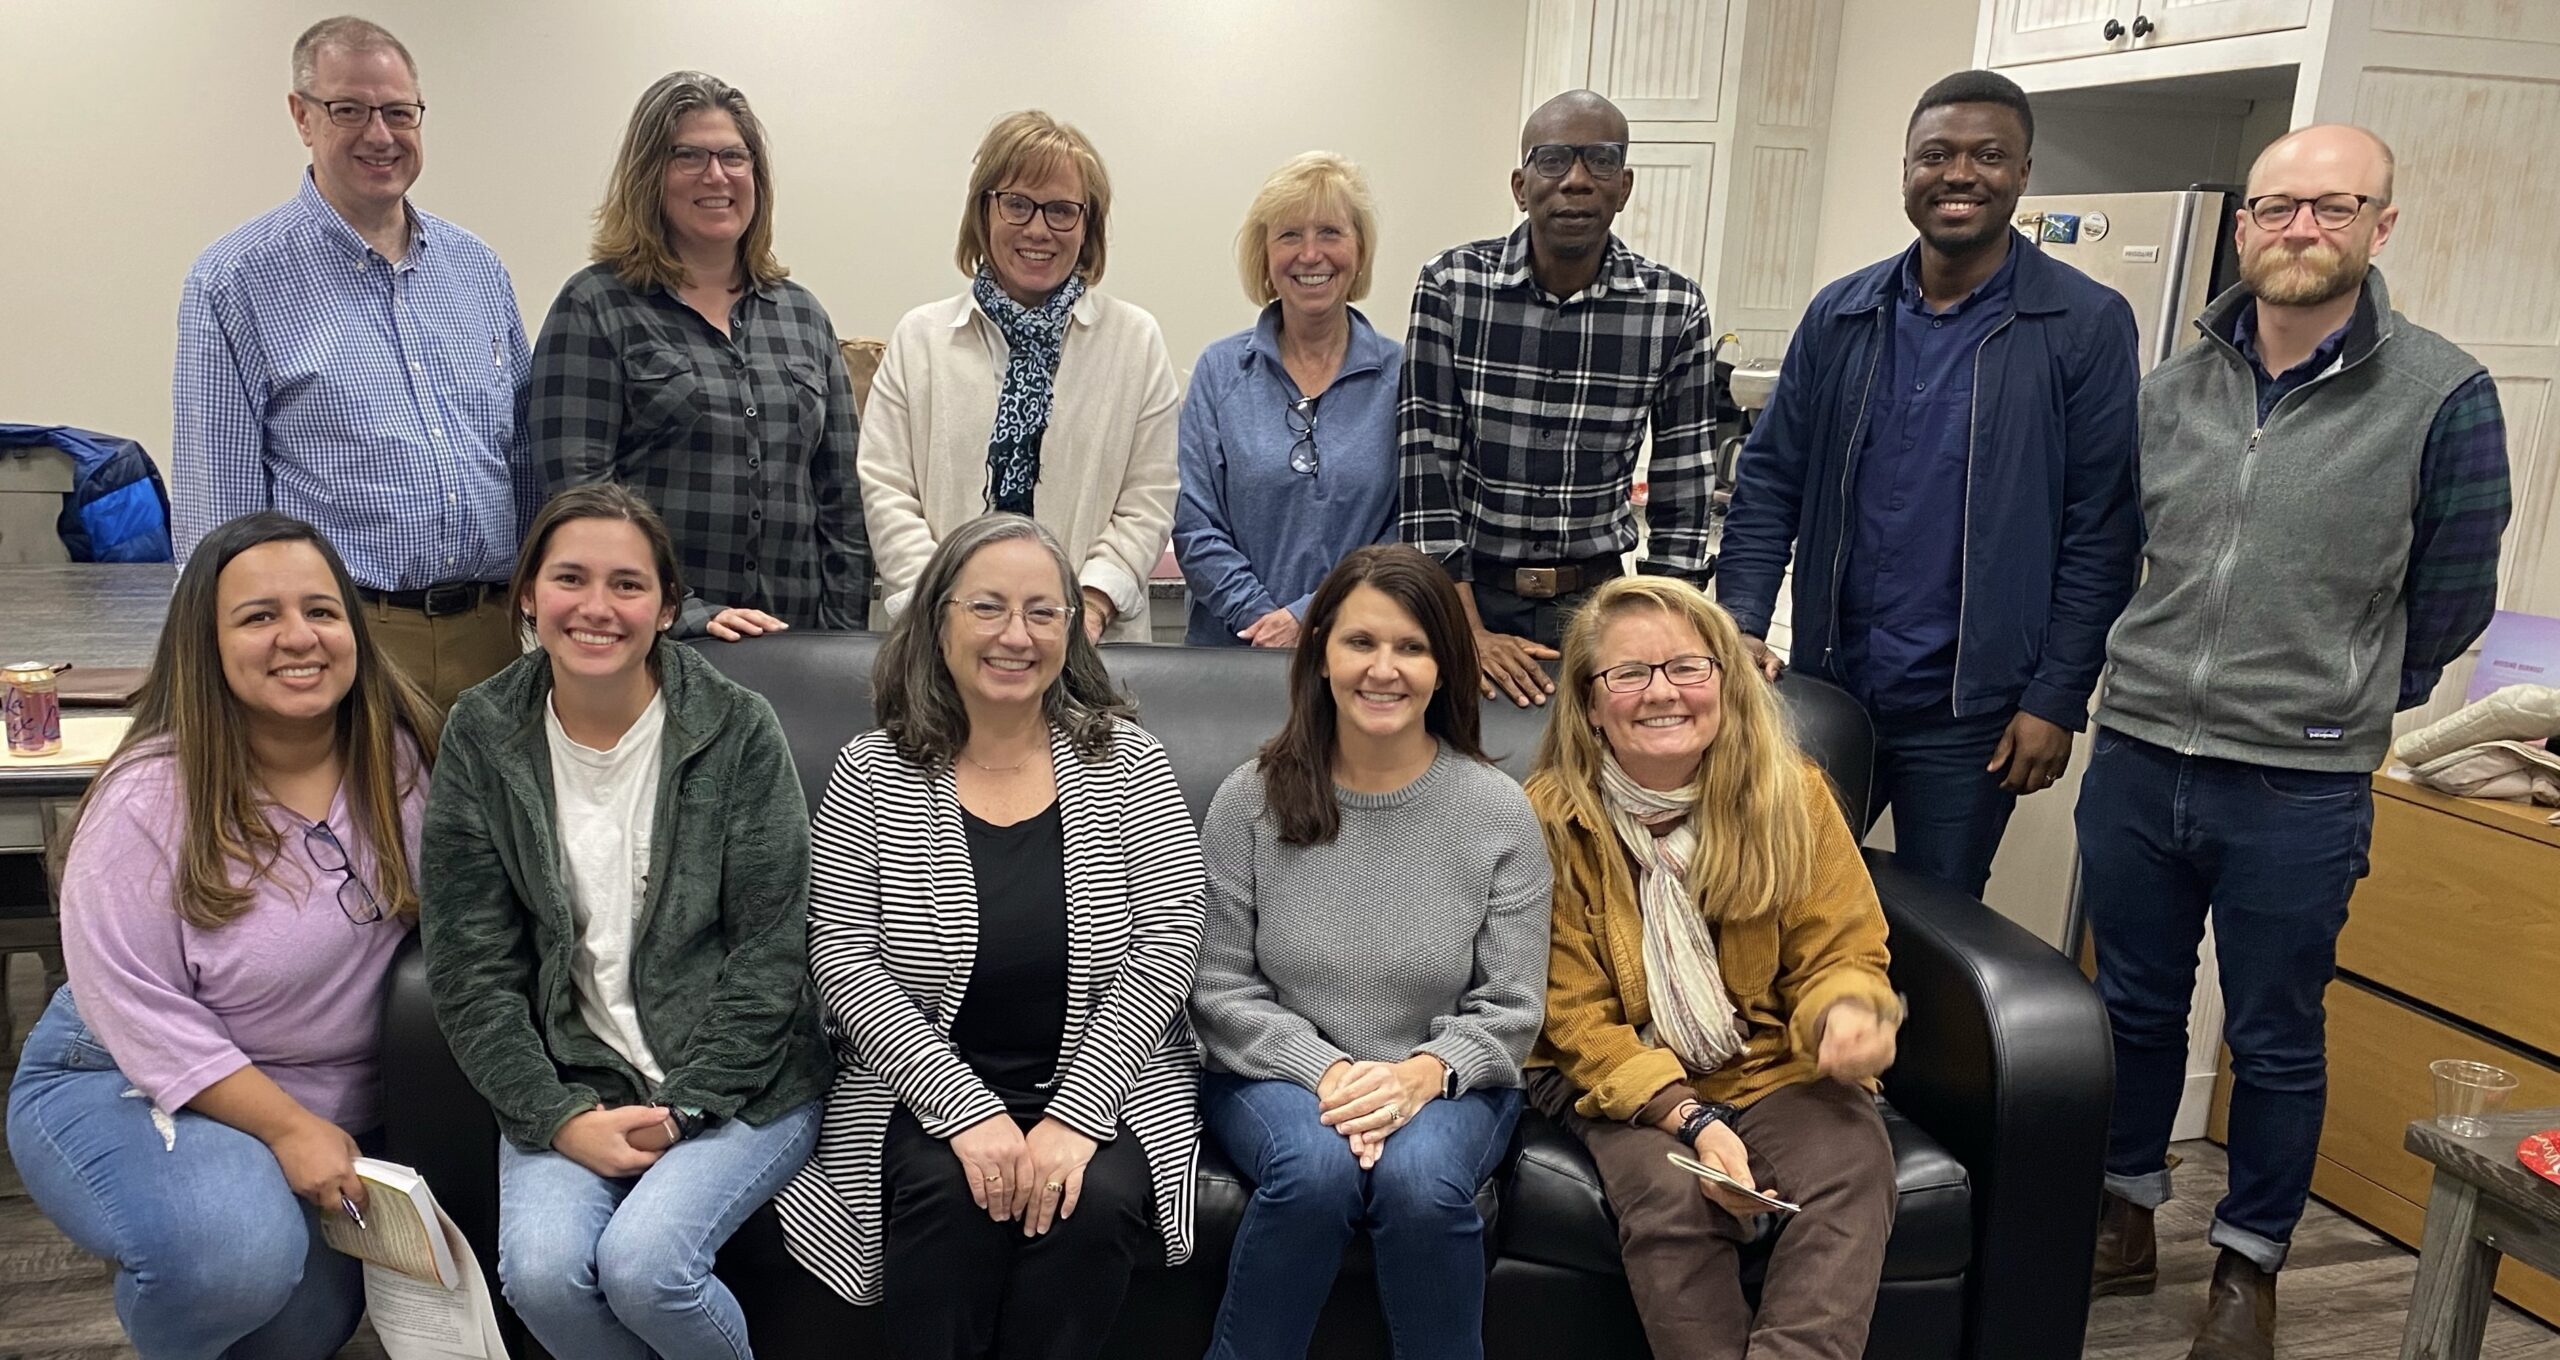 Top Row L to R: Dr. Kenneth Wheeler, Charity Robertson, Dr. Amy Cottrill, Robin McNally, Tunji Adesesan, George Blankson, Dr. Andrew Jones,
Bottom Row L to R: Dr. Susana Solomon, Kylie Stover, Shannon Gibson, Dr. Melissa Hickman, Elizabeth Smith
